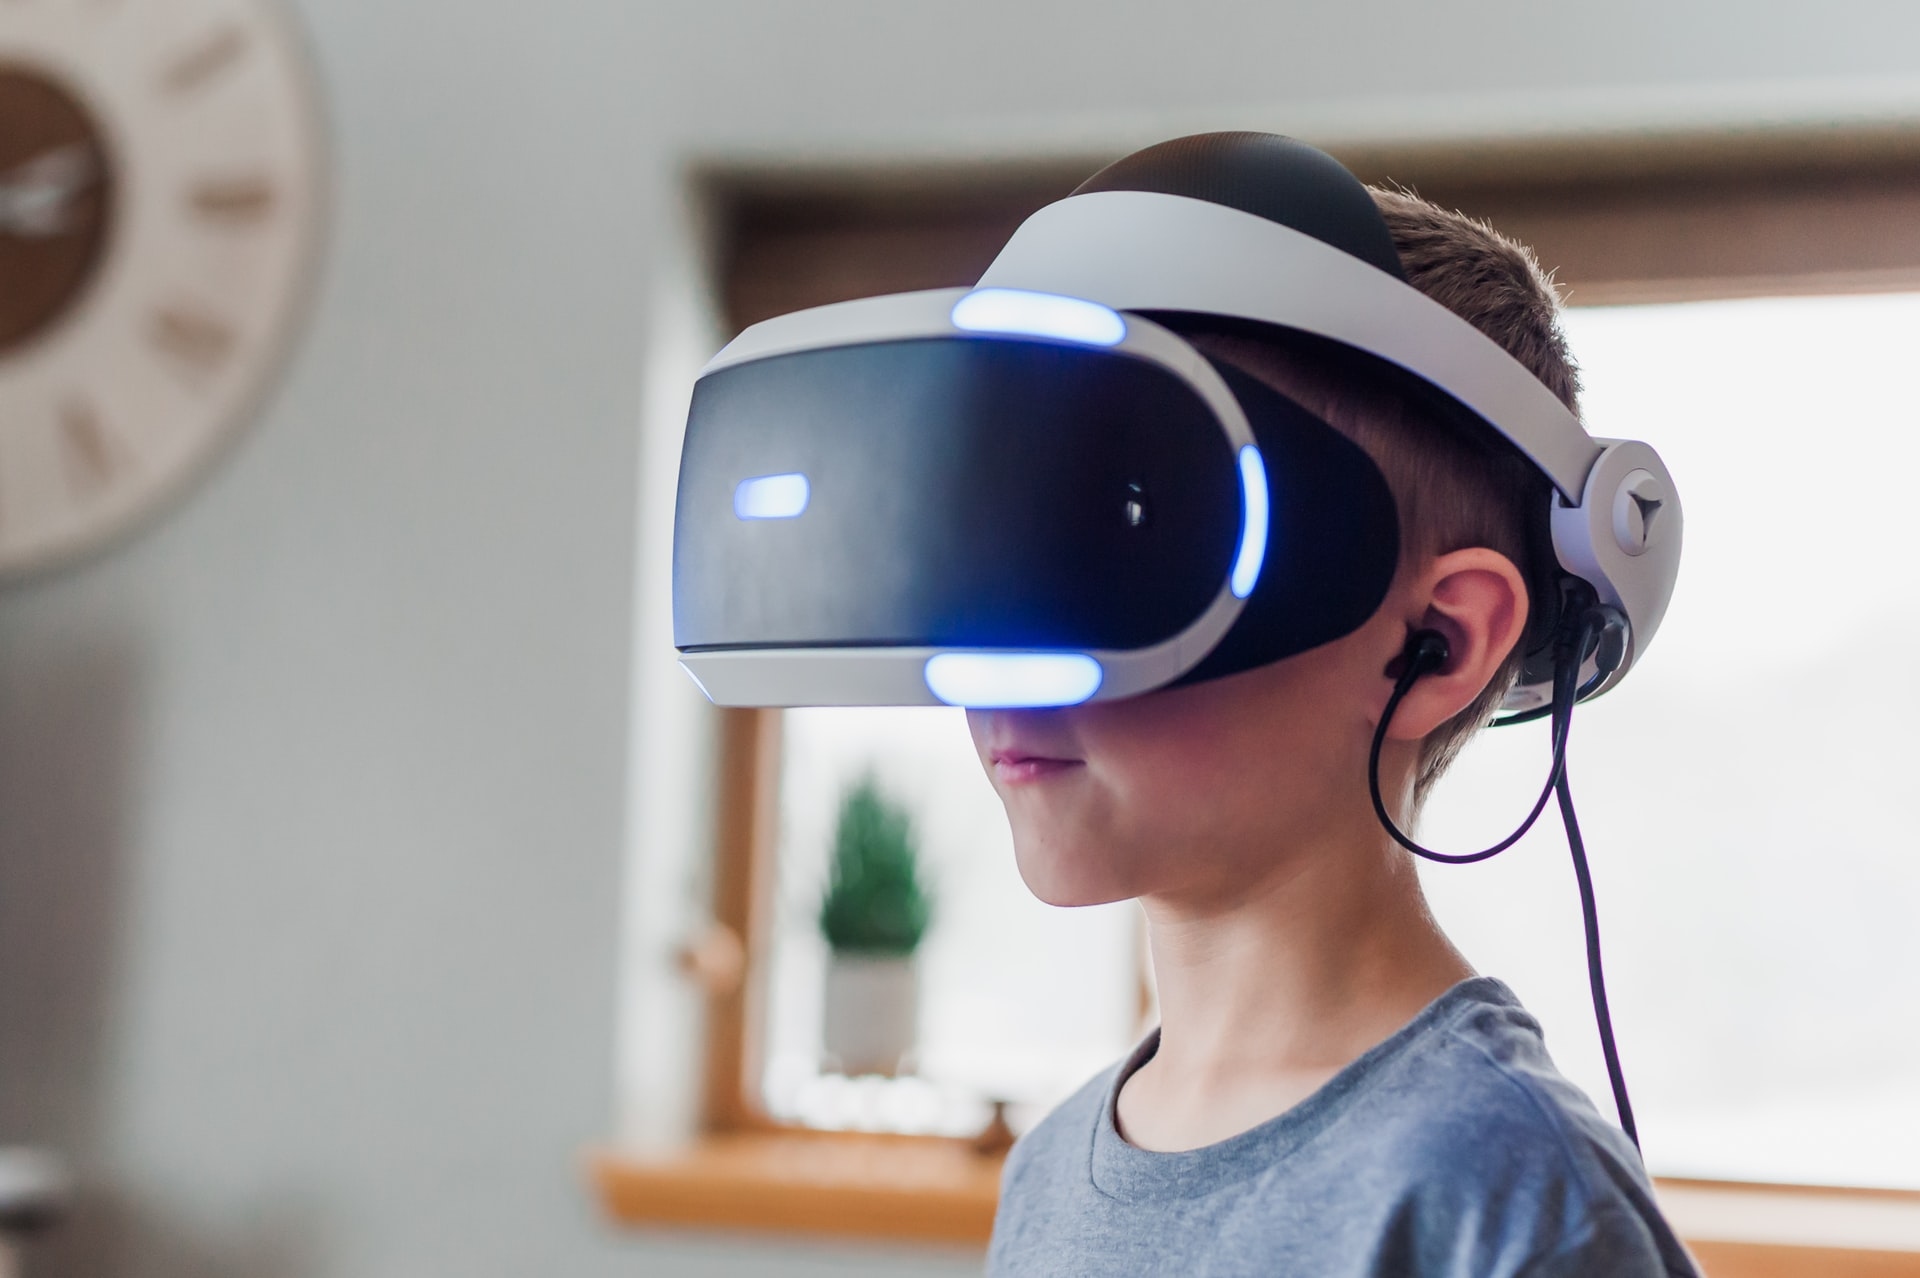 How To Play Games In VR Headset